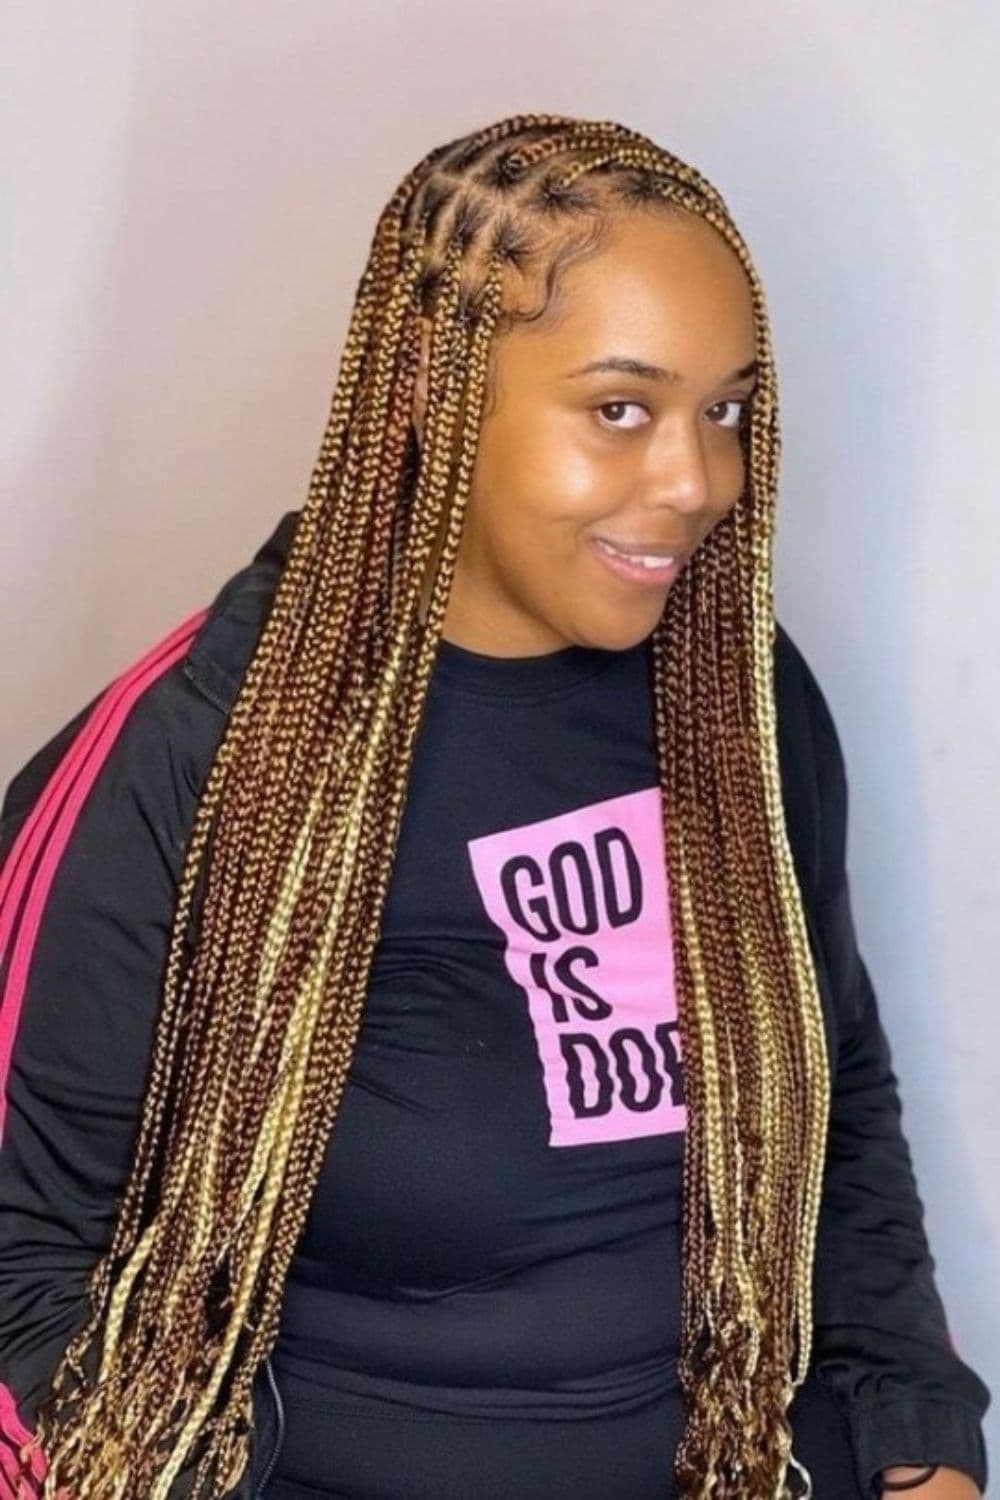 A woman wearing a black sweater with brown and blonde knotless braids.